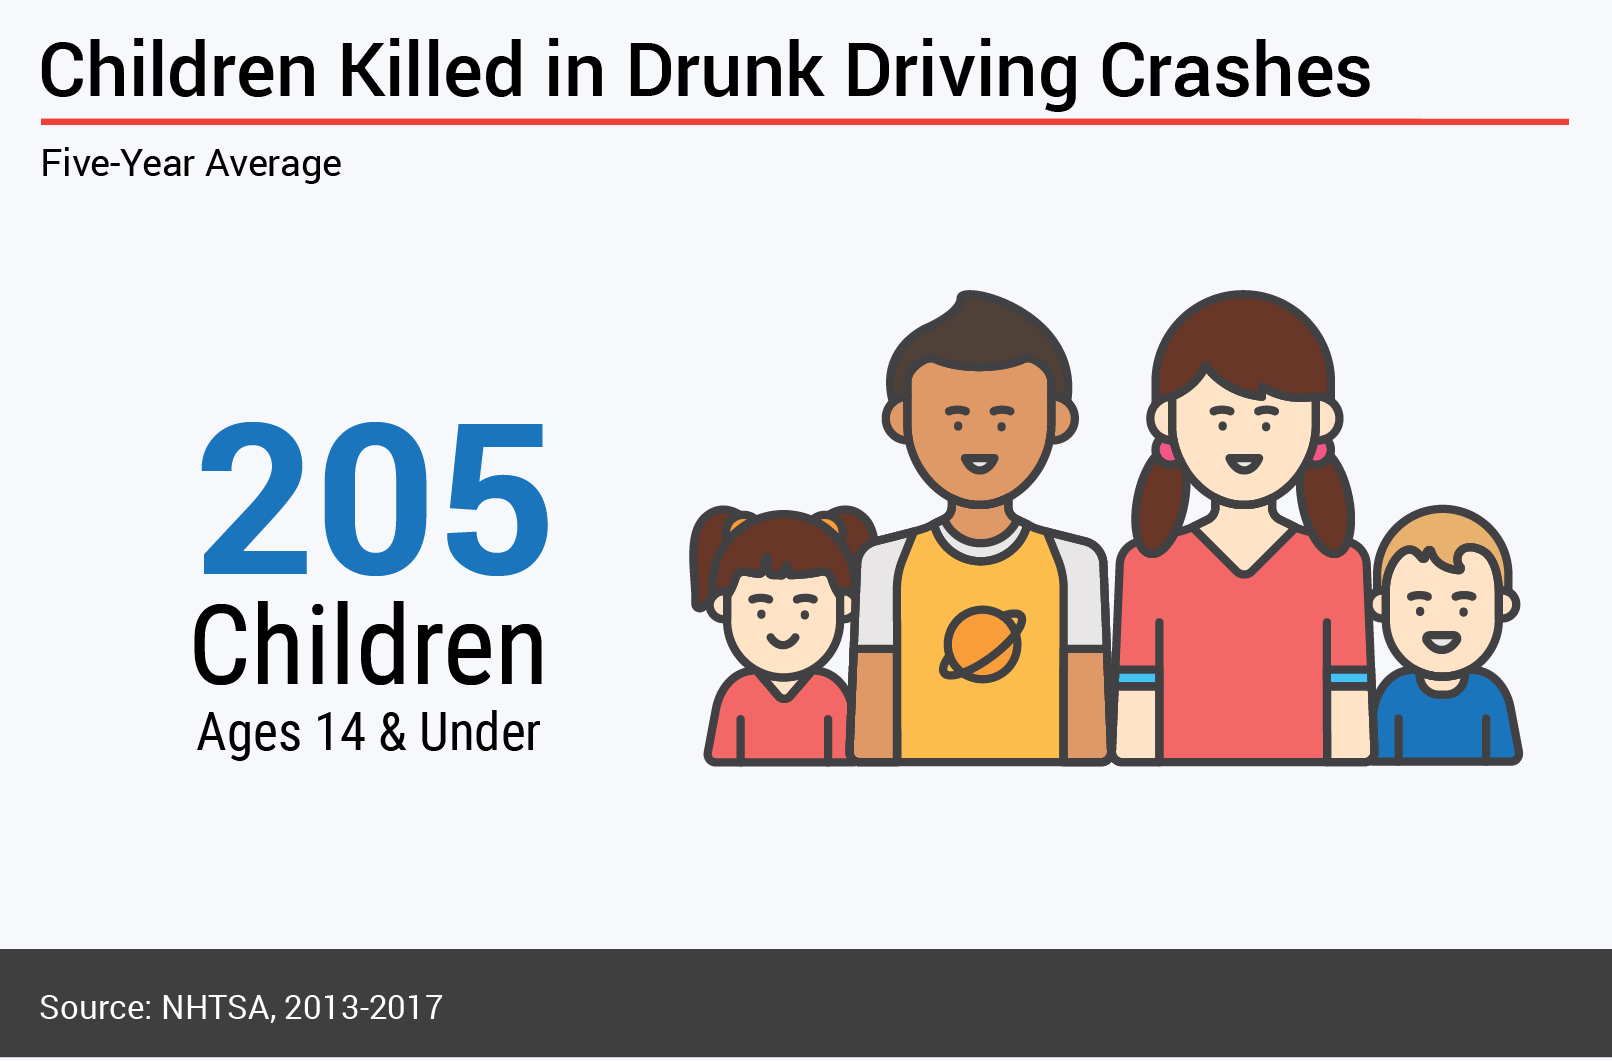 Drunk Driving Study - Fatalities for Children 14 and under